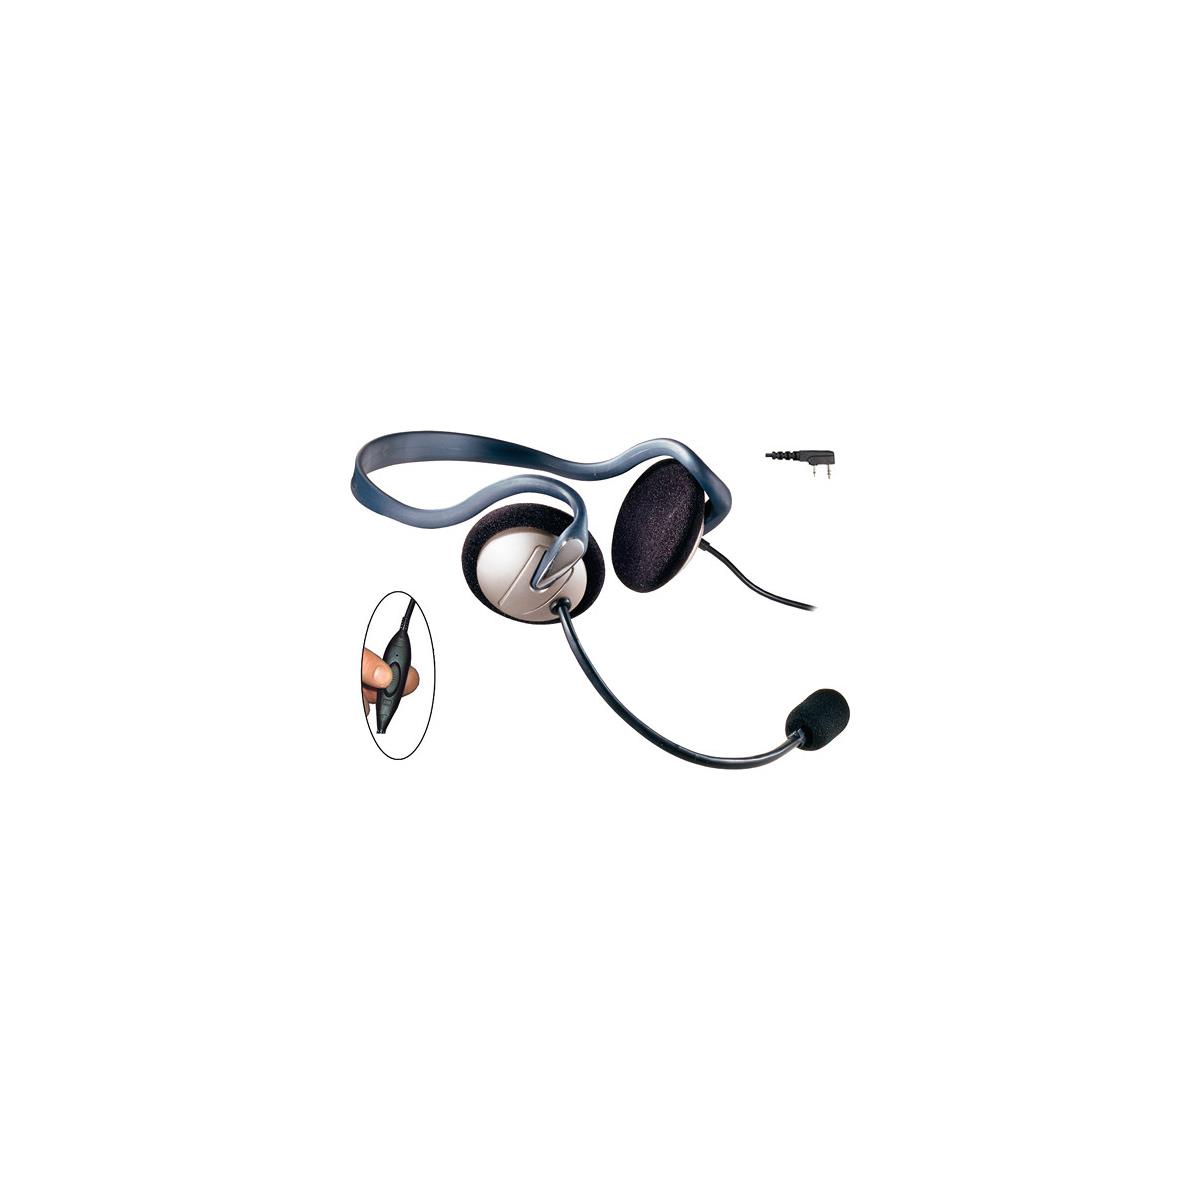 Image of Eartec Monarch Inline PTT Headset with Mic and 2-Pin Kenwood for PTT Radios